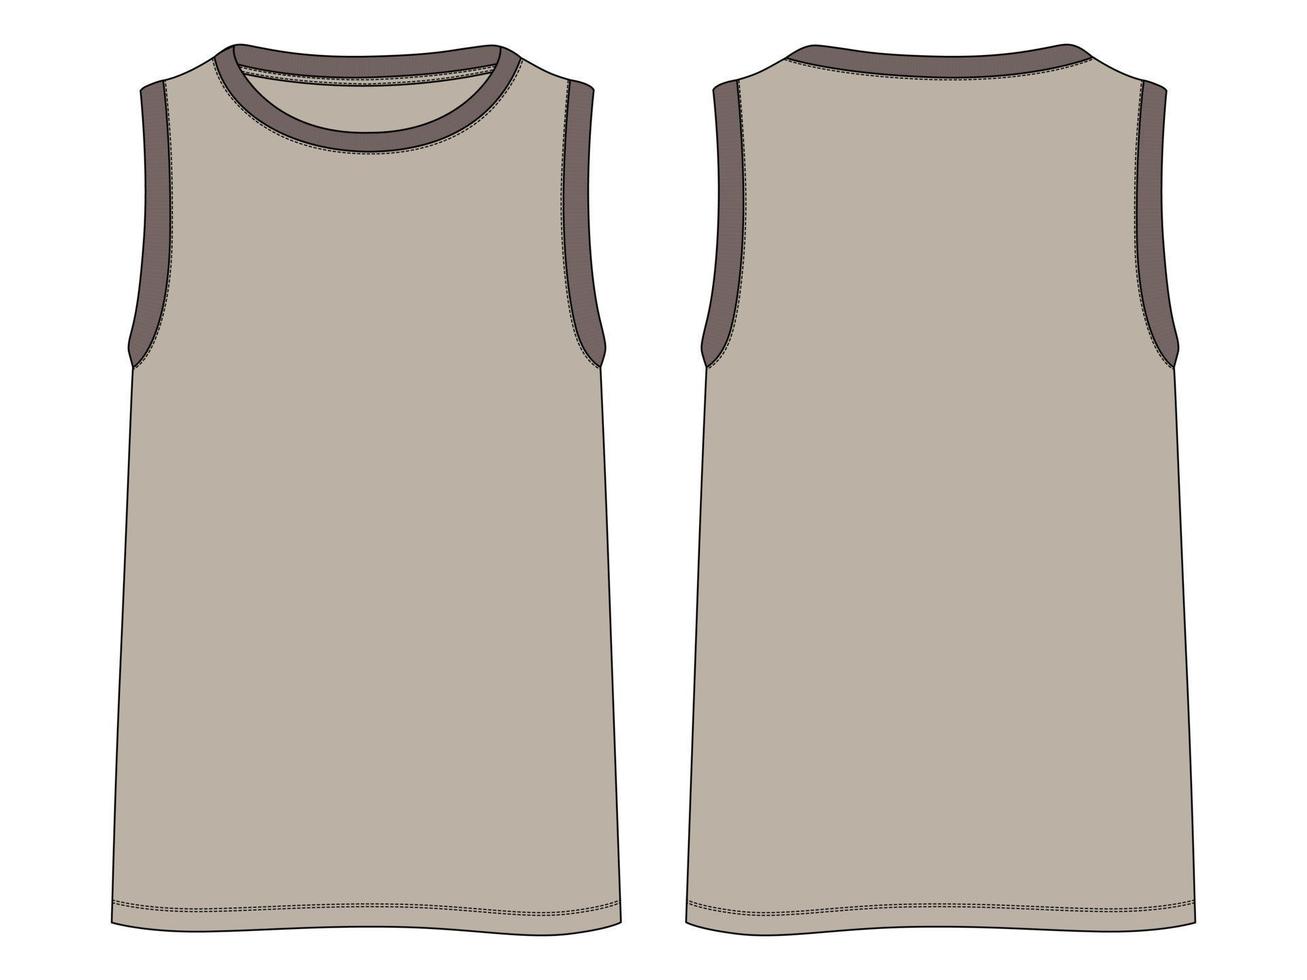 Tank Tops Technical Fashion flat sketch vector illustration template ...